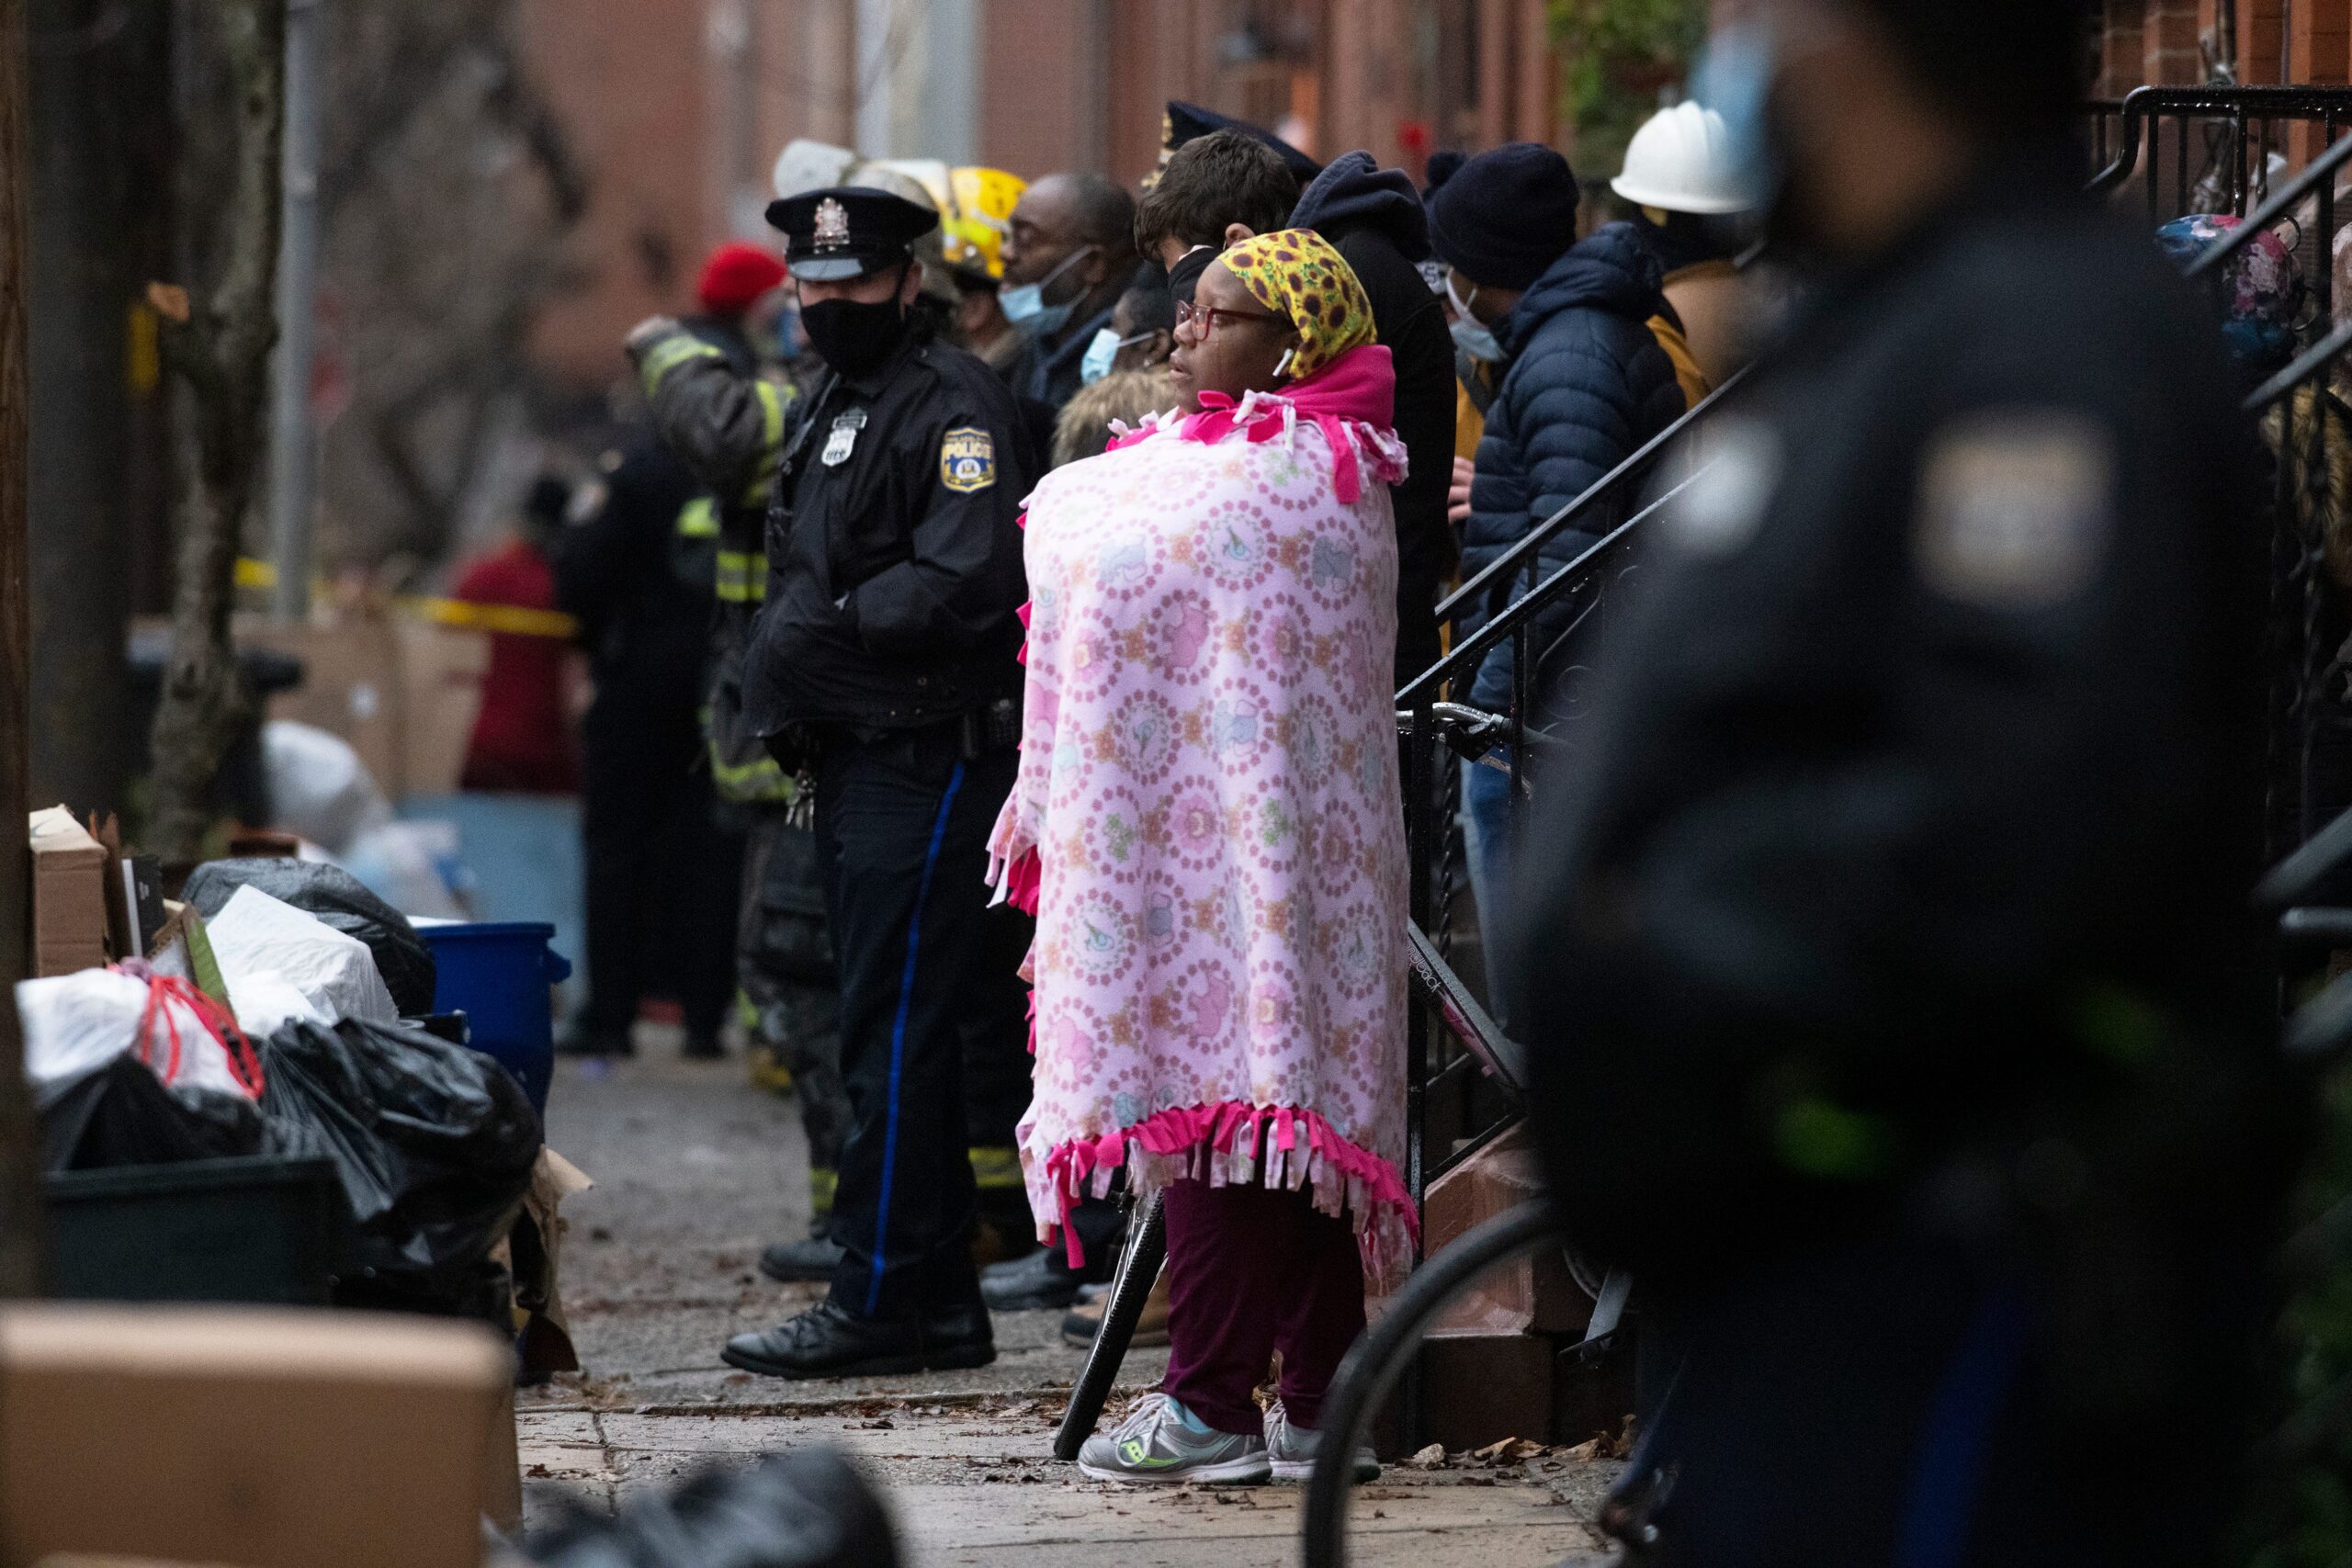  Seven Children Among 13 Burned to Death in Flat Fire